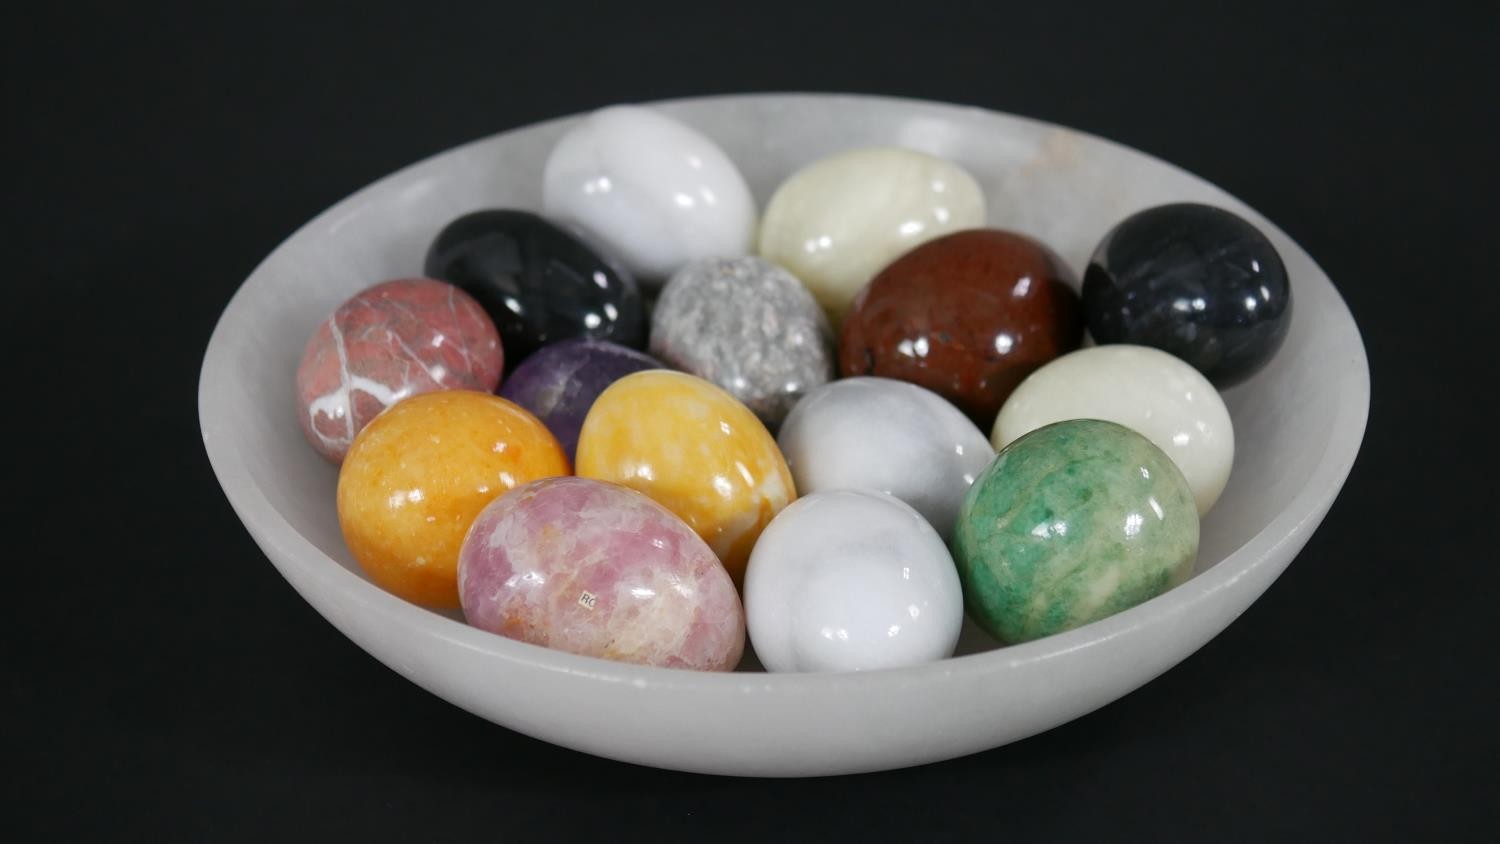 A collection of sixteen egg-shaped hand coolers, various gemstones and minerals in a carved white